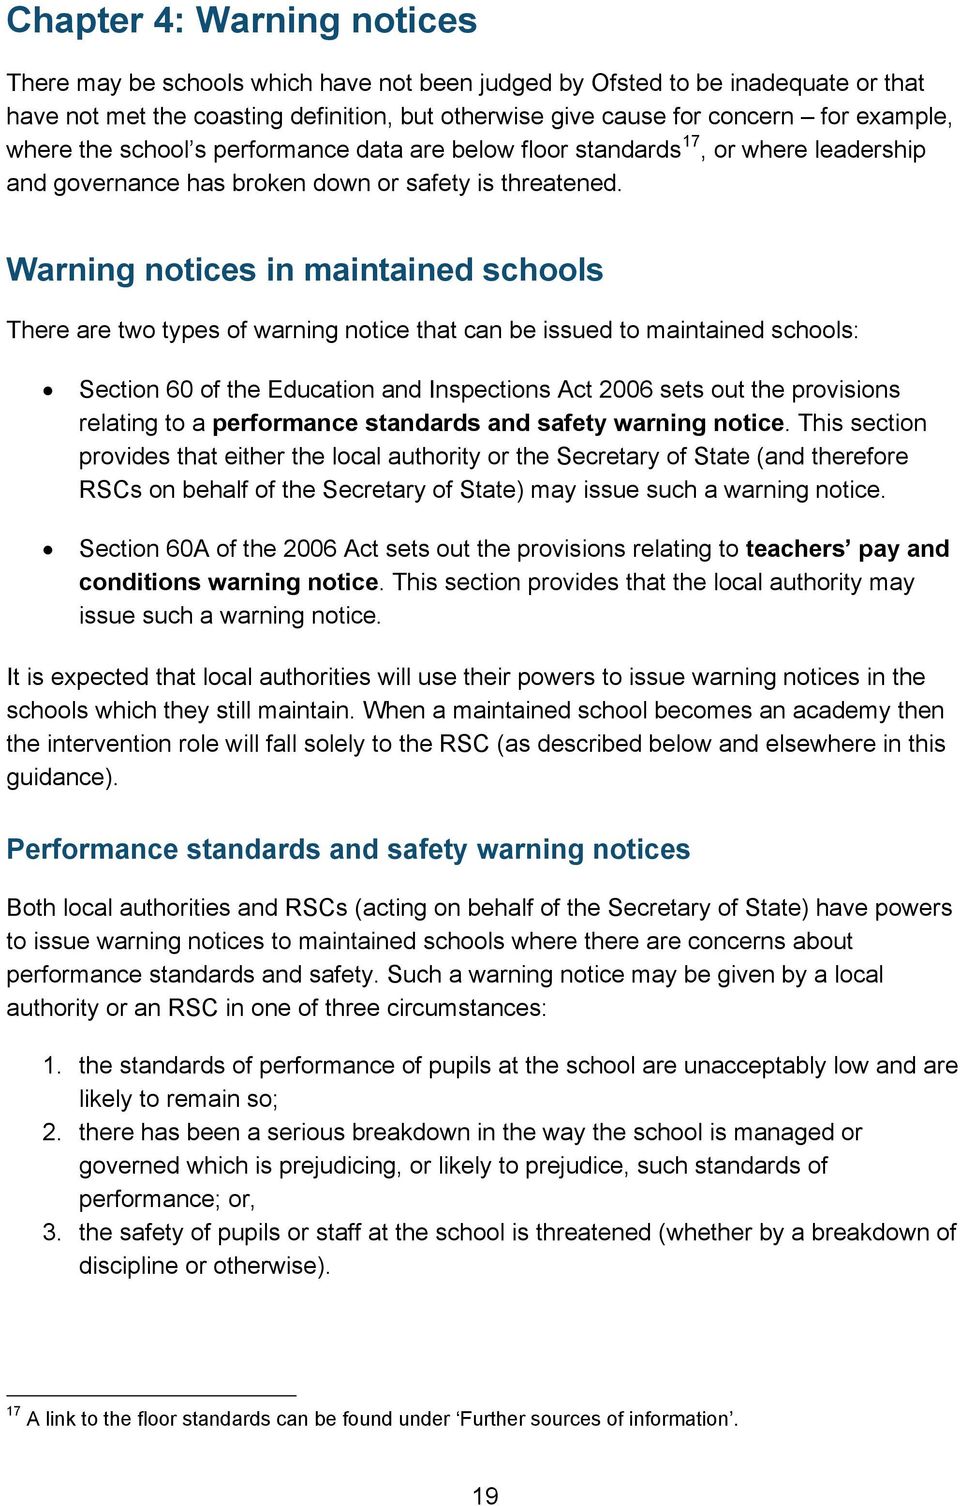 Warning notices in maintained schools There are two types of warning notice that can be issued to maintained schools: Section 60 of the Education and Inspections Act 2006 sets out the provisions